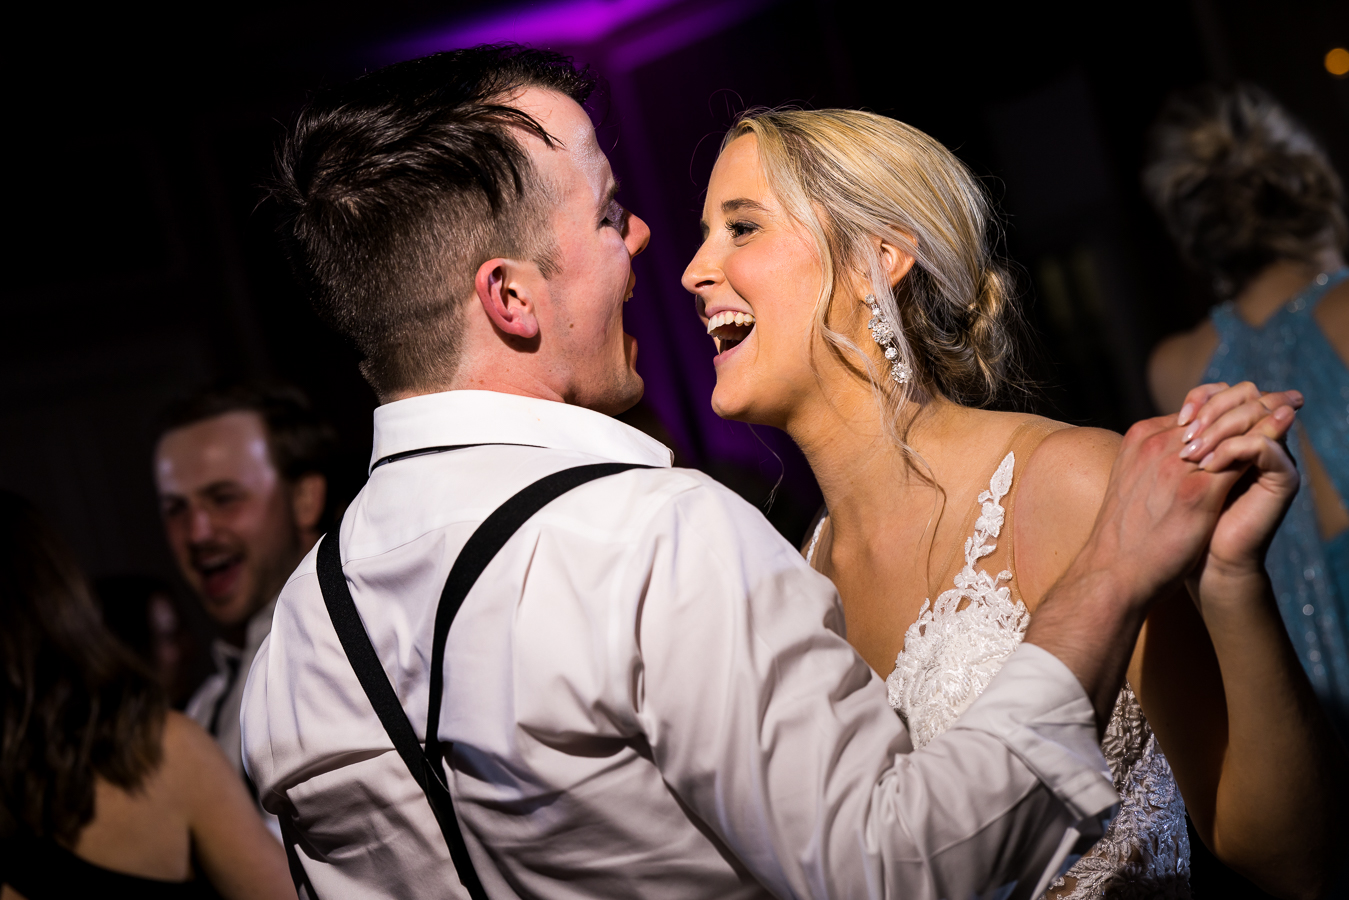 best pa wedding photographer, lisa rhinehart, captures this image of the bride and groom holding hands while singing and dancing with one another at their wedding reception 